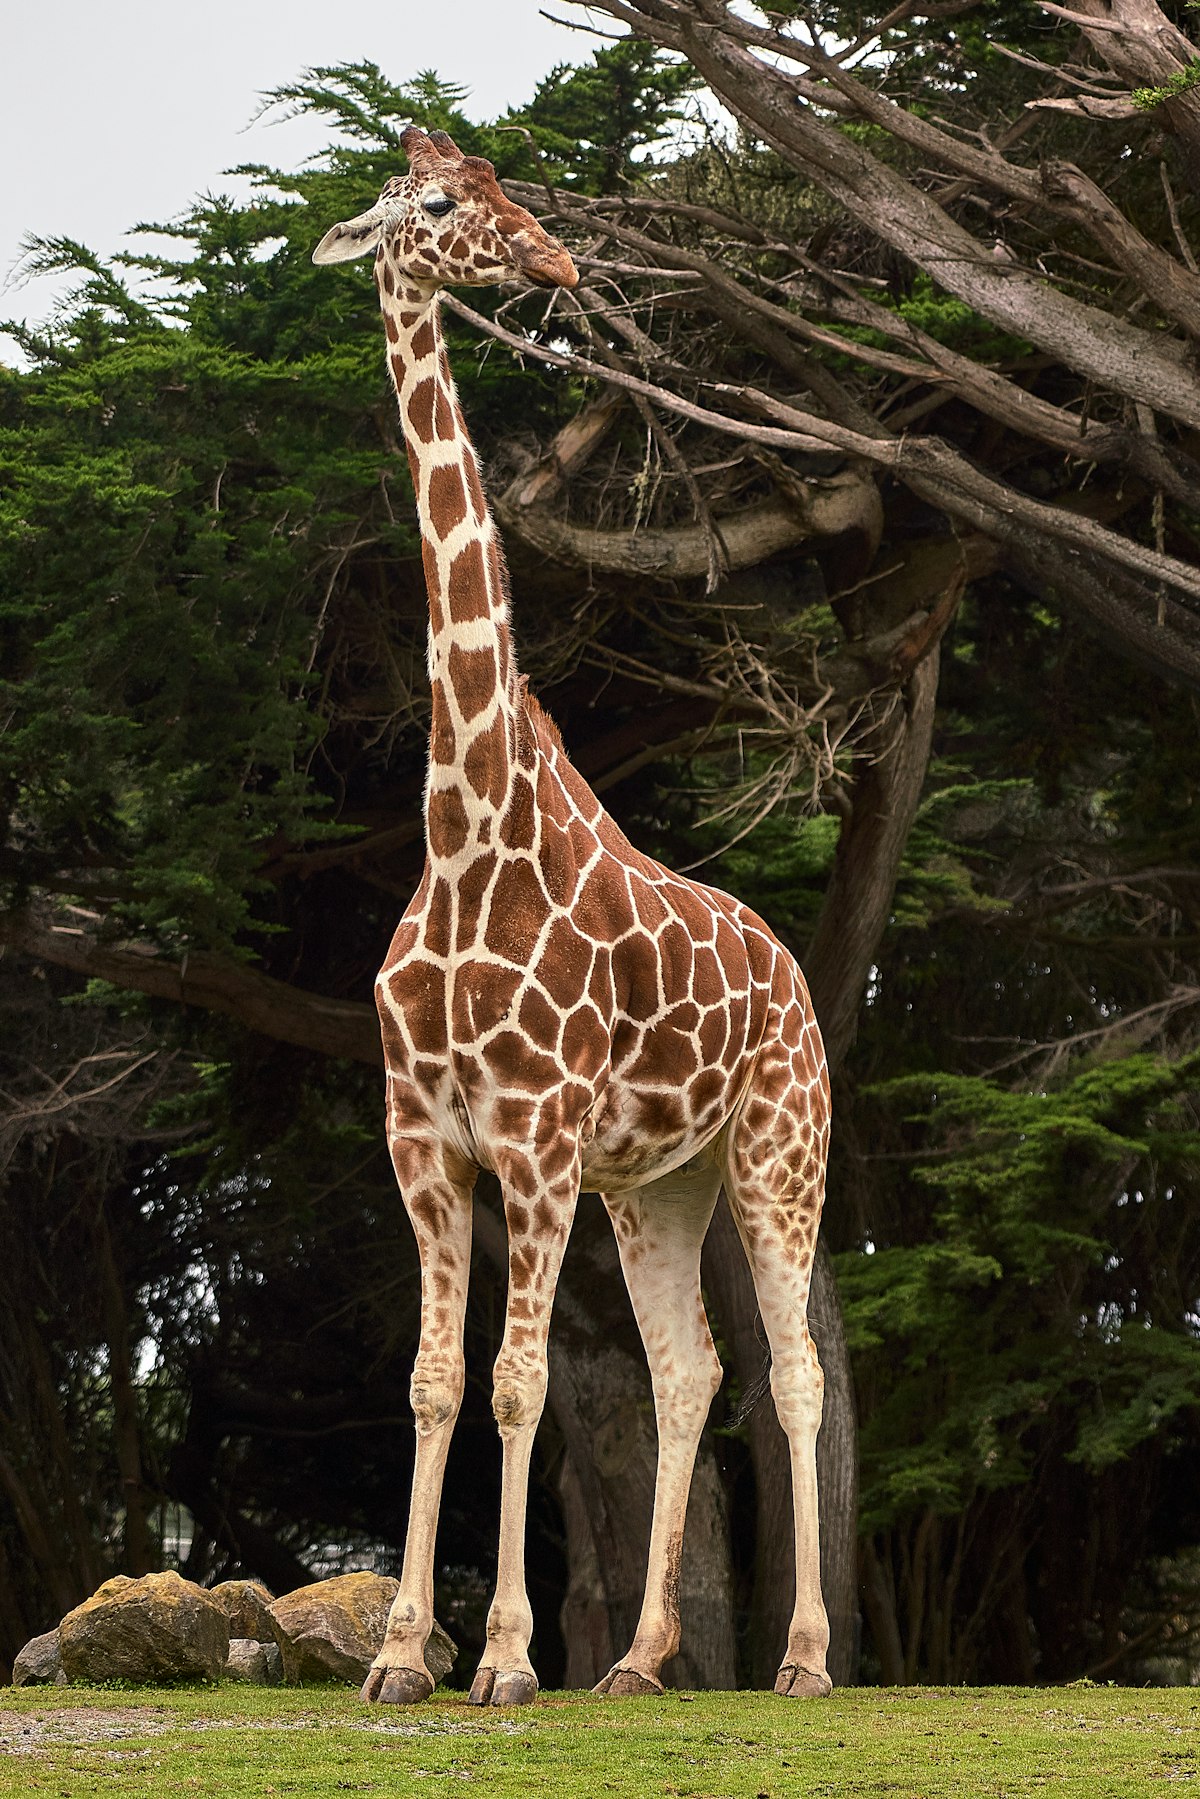 The Majestic Beauty of Giraffes: Learn Fascinating Facts and Join the Conservation Efforts